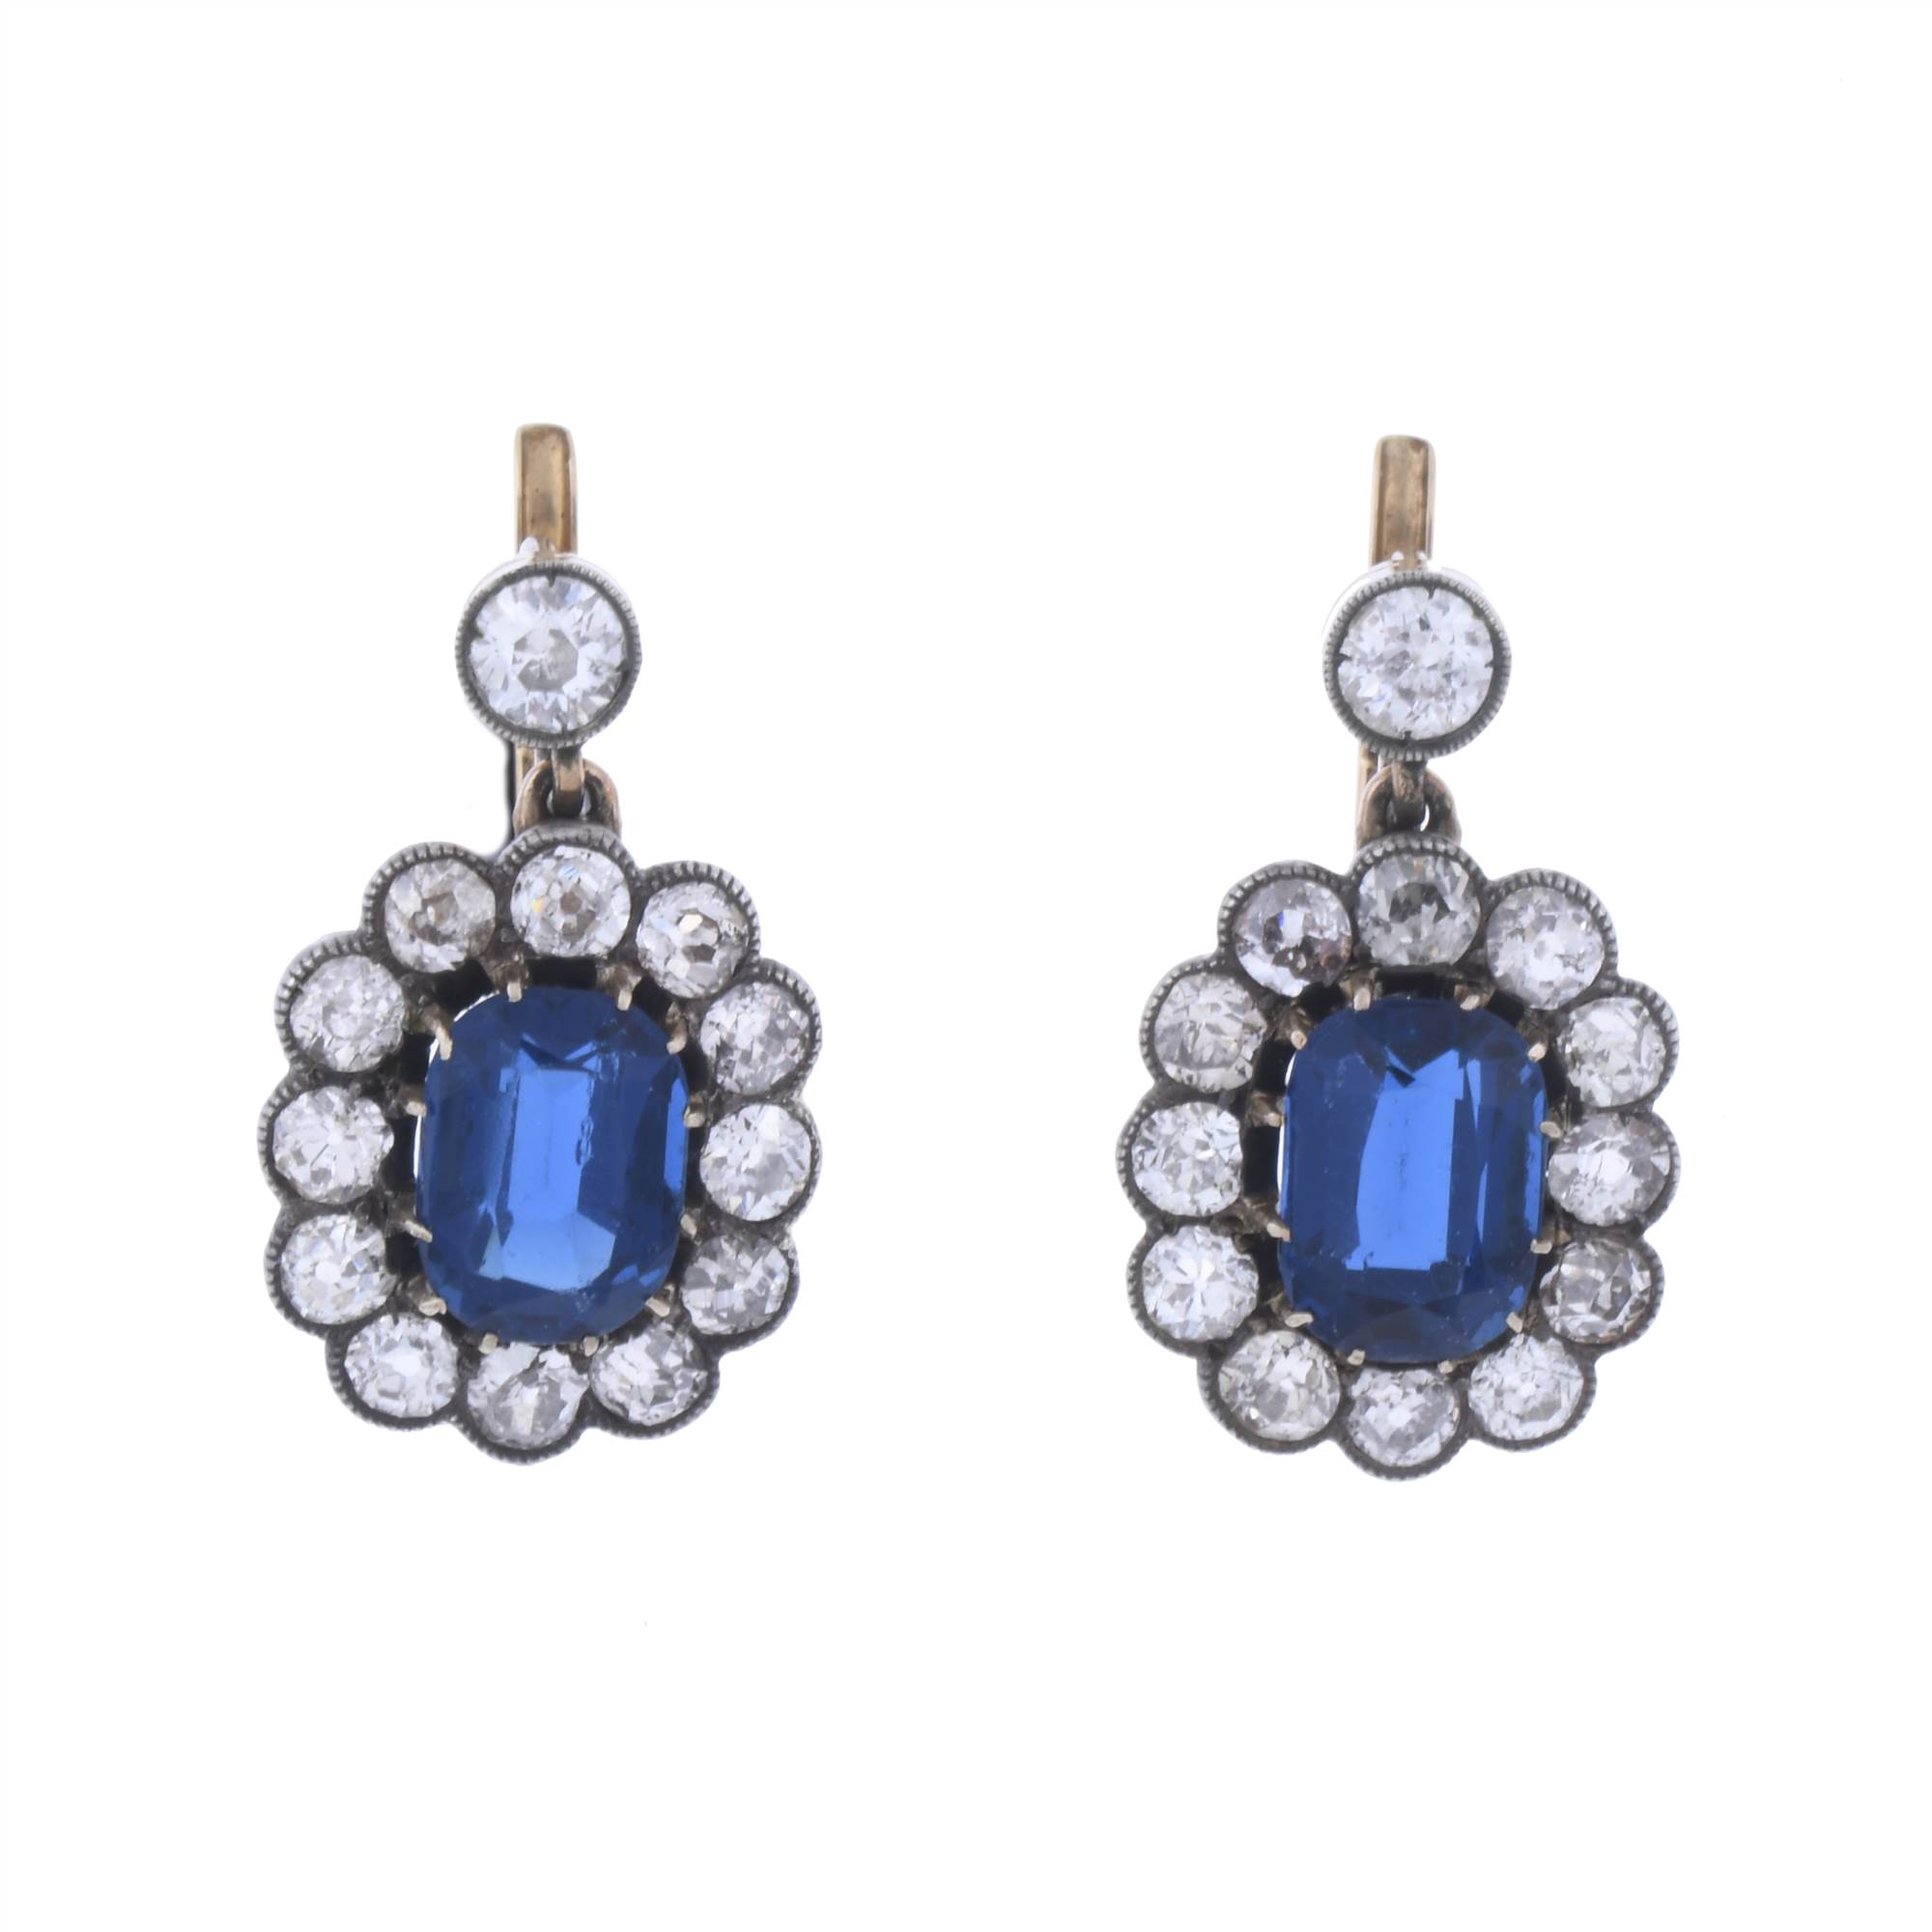 TWO-TONE GOLD EARRINGS WITH SAPPHIRES AND DIAMONDS.